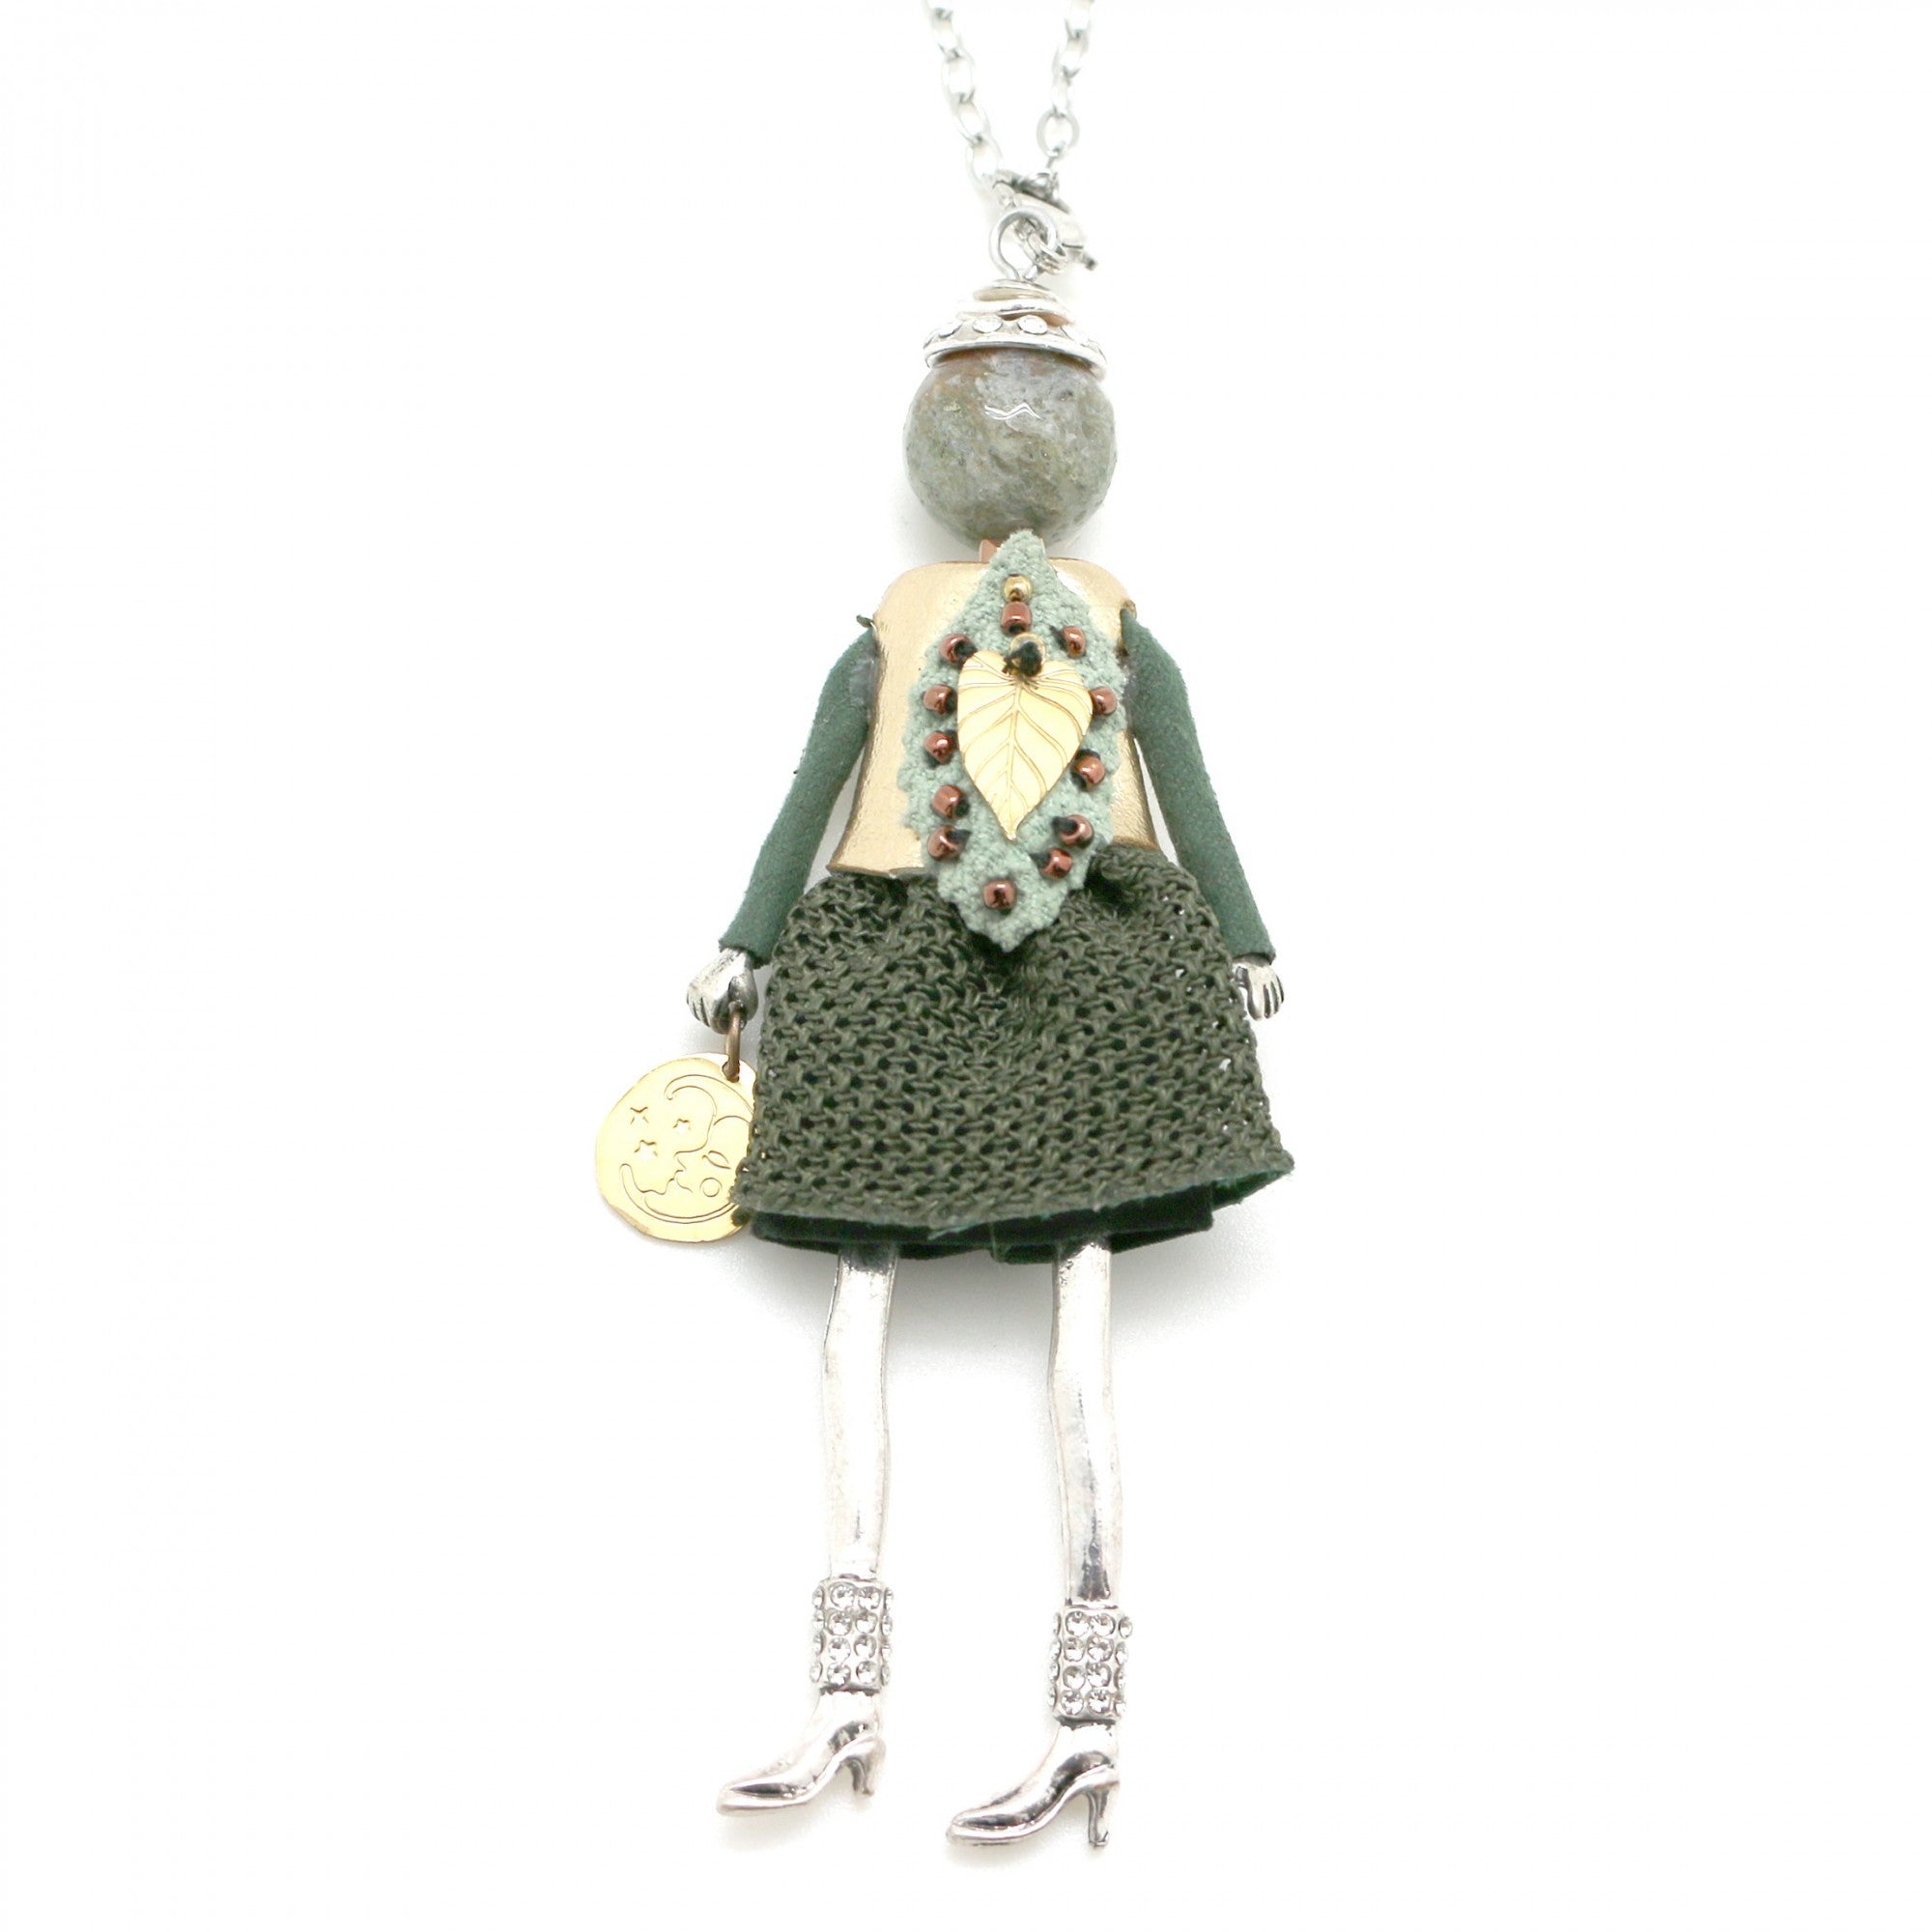 Moon C Doll Pendant on a Long Chain, Agate, Fabric, Metal / Green / 4 Inches / Gift Idea